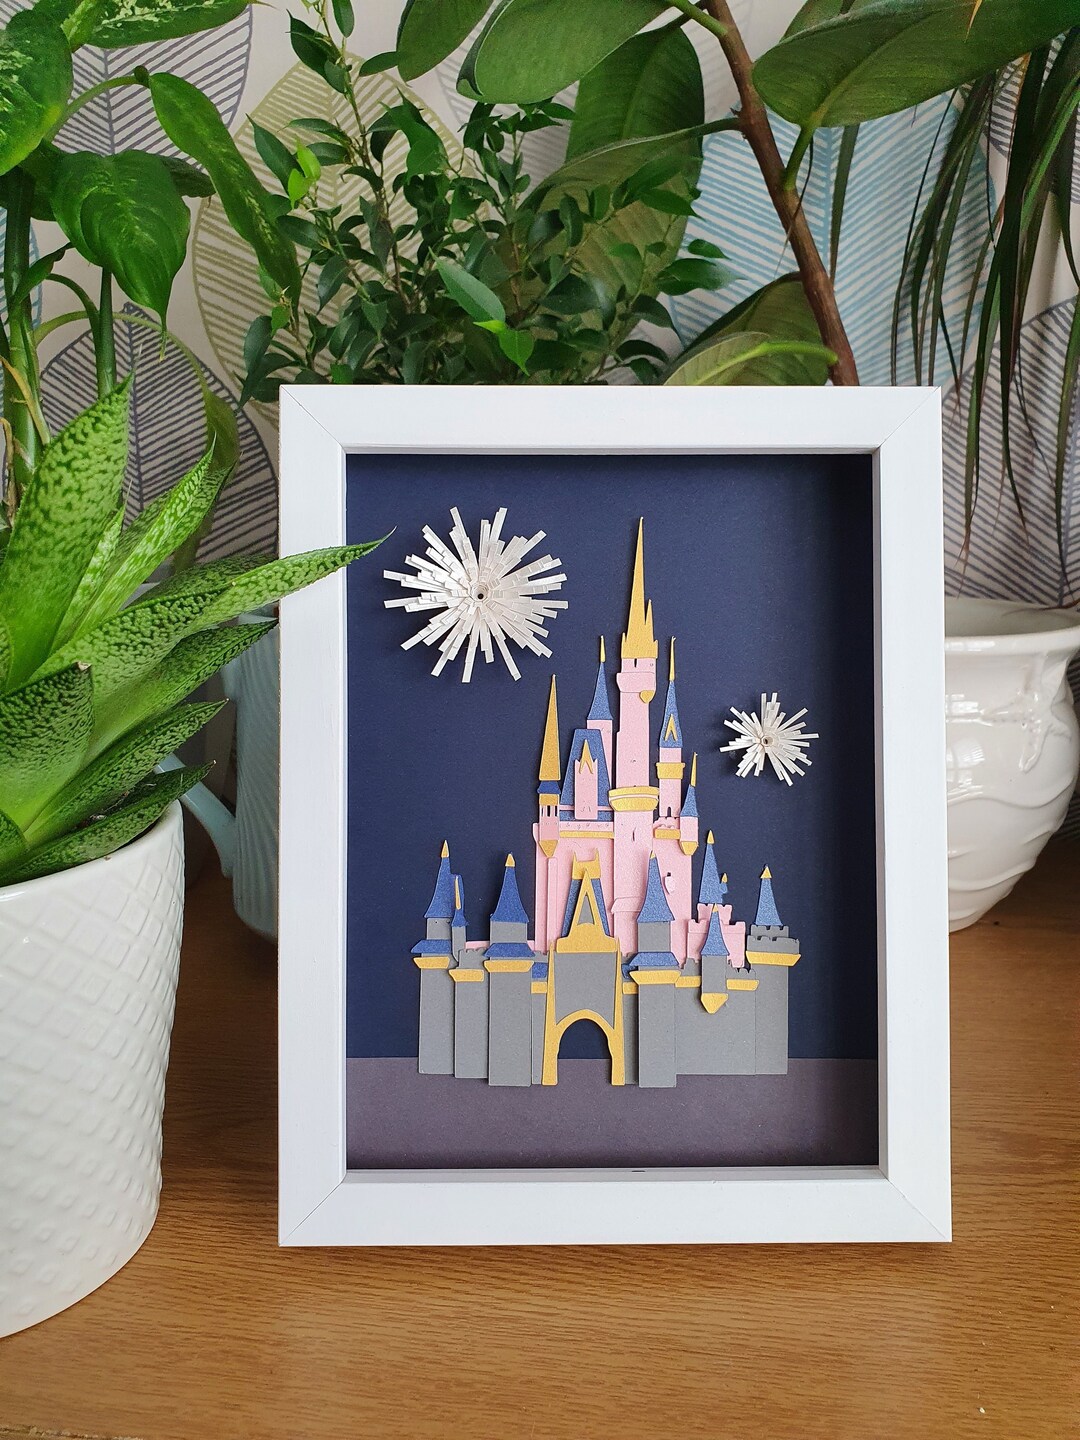 These $25 ART BOXES Are Sold At DISNEYWORLD?!? I'm shook.. 